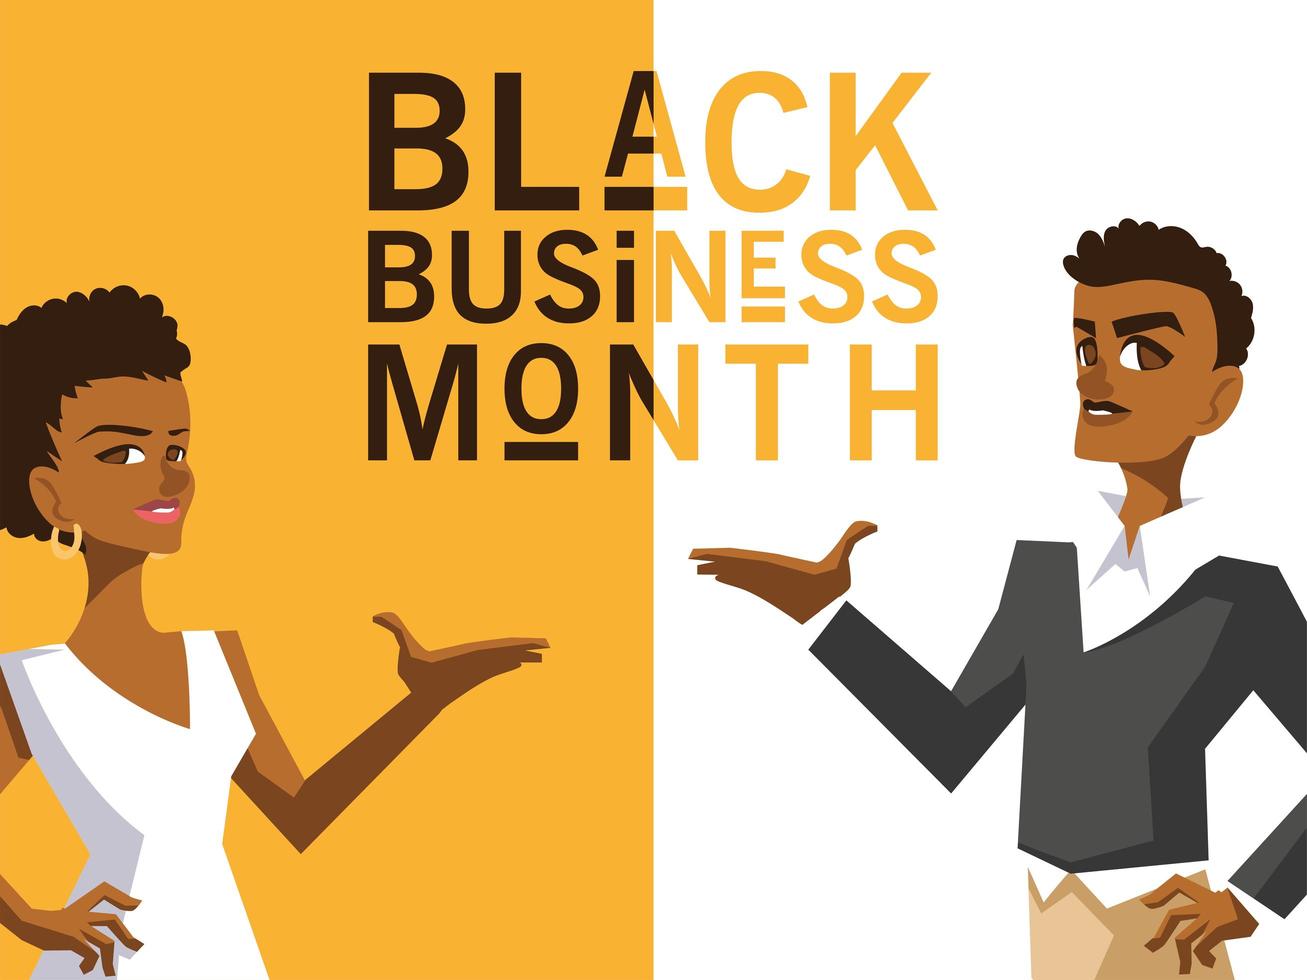 Black business month with afro woman and man cartoons vector design